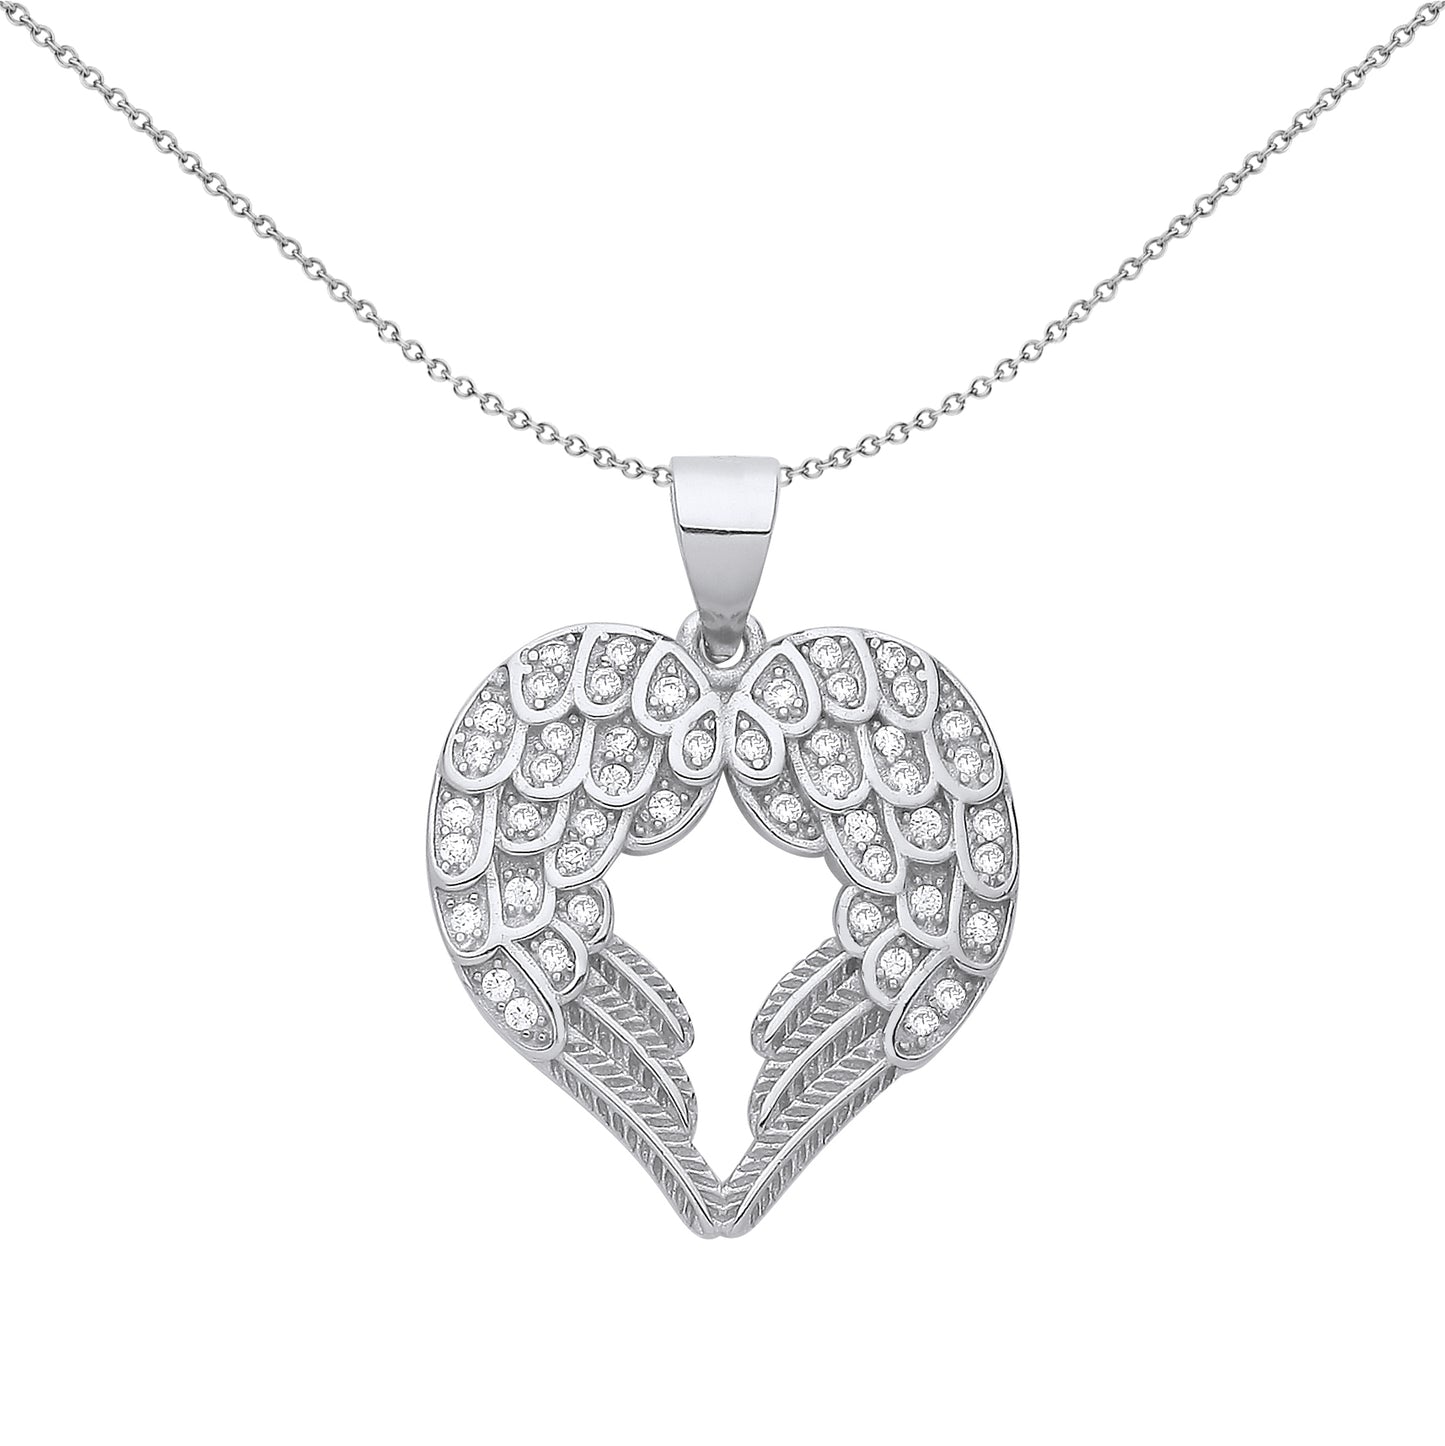 Silver  Folded Textured Angel Wings Love Heart Pendant Necklace - GVP655